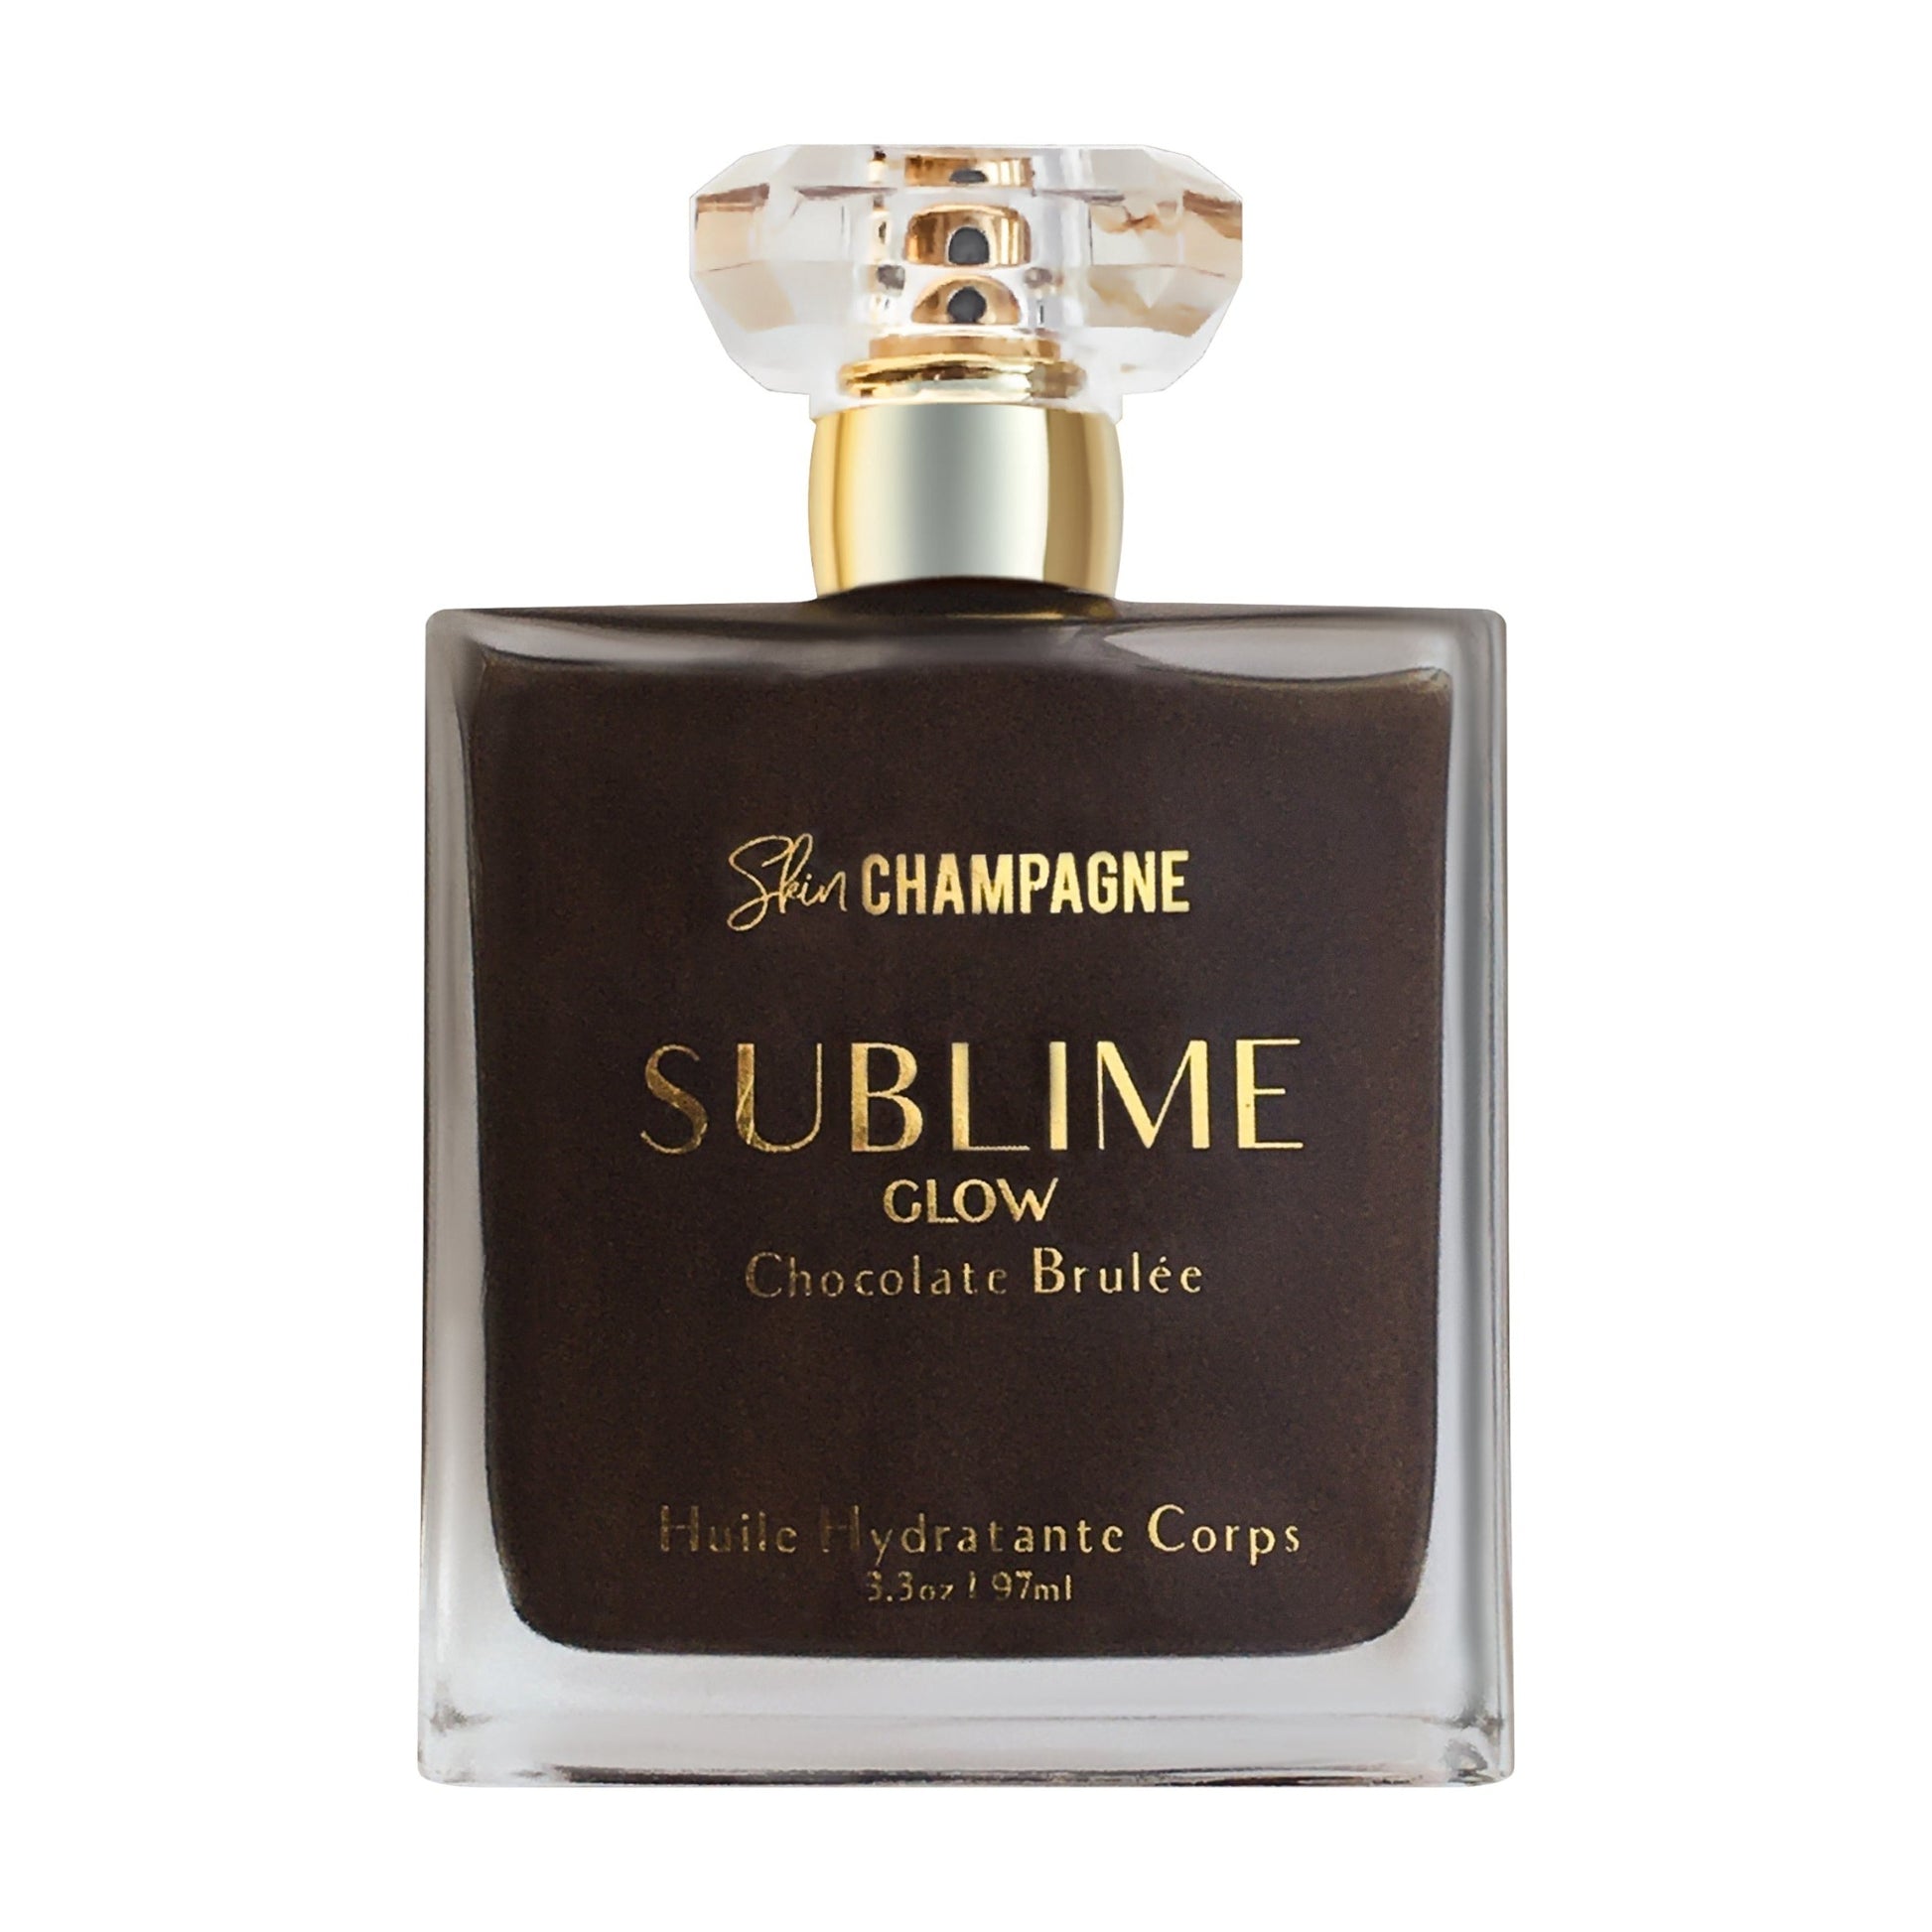 Sublime Glow Body Oil - Chocolate Brulée - Skin Champagne